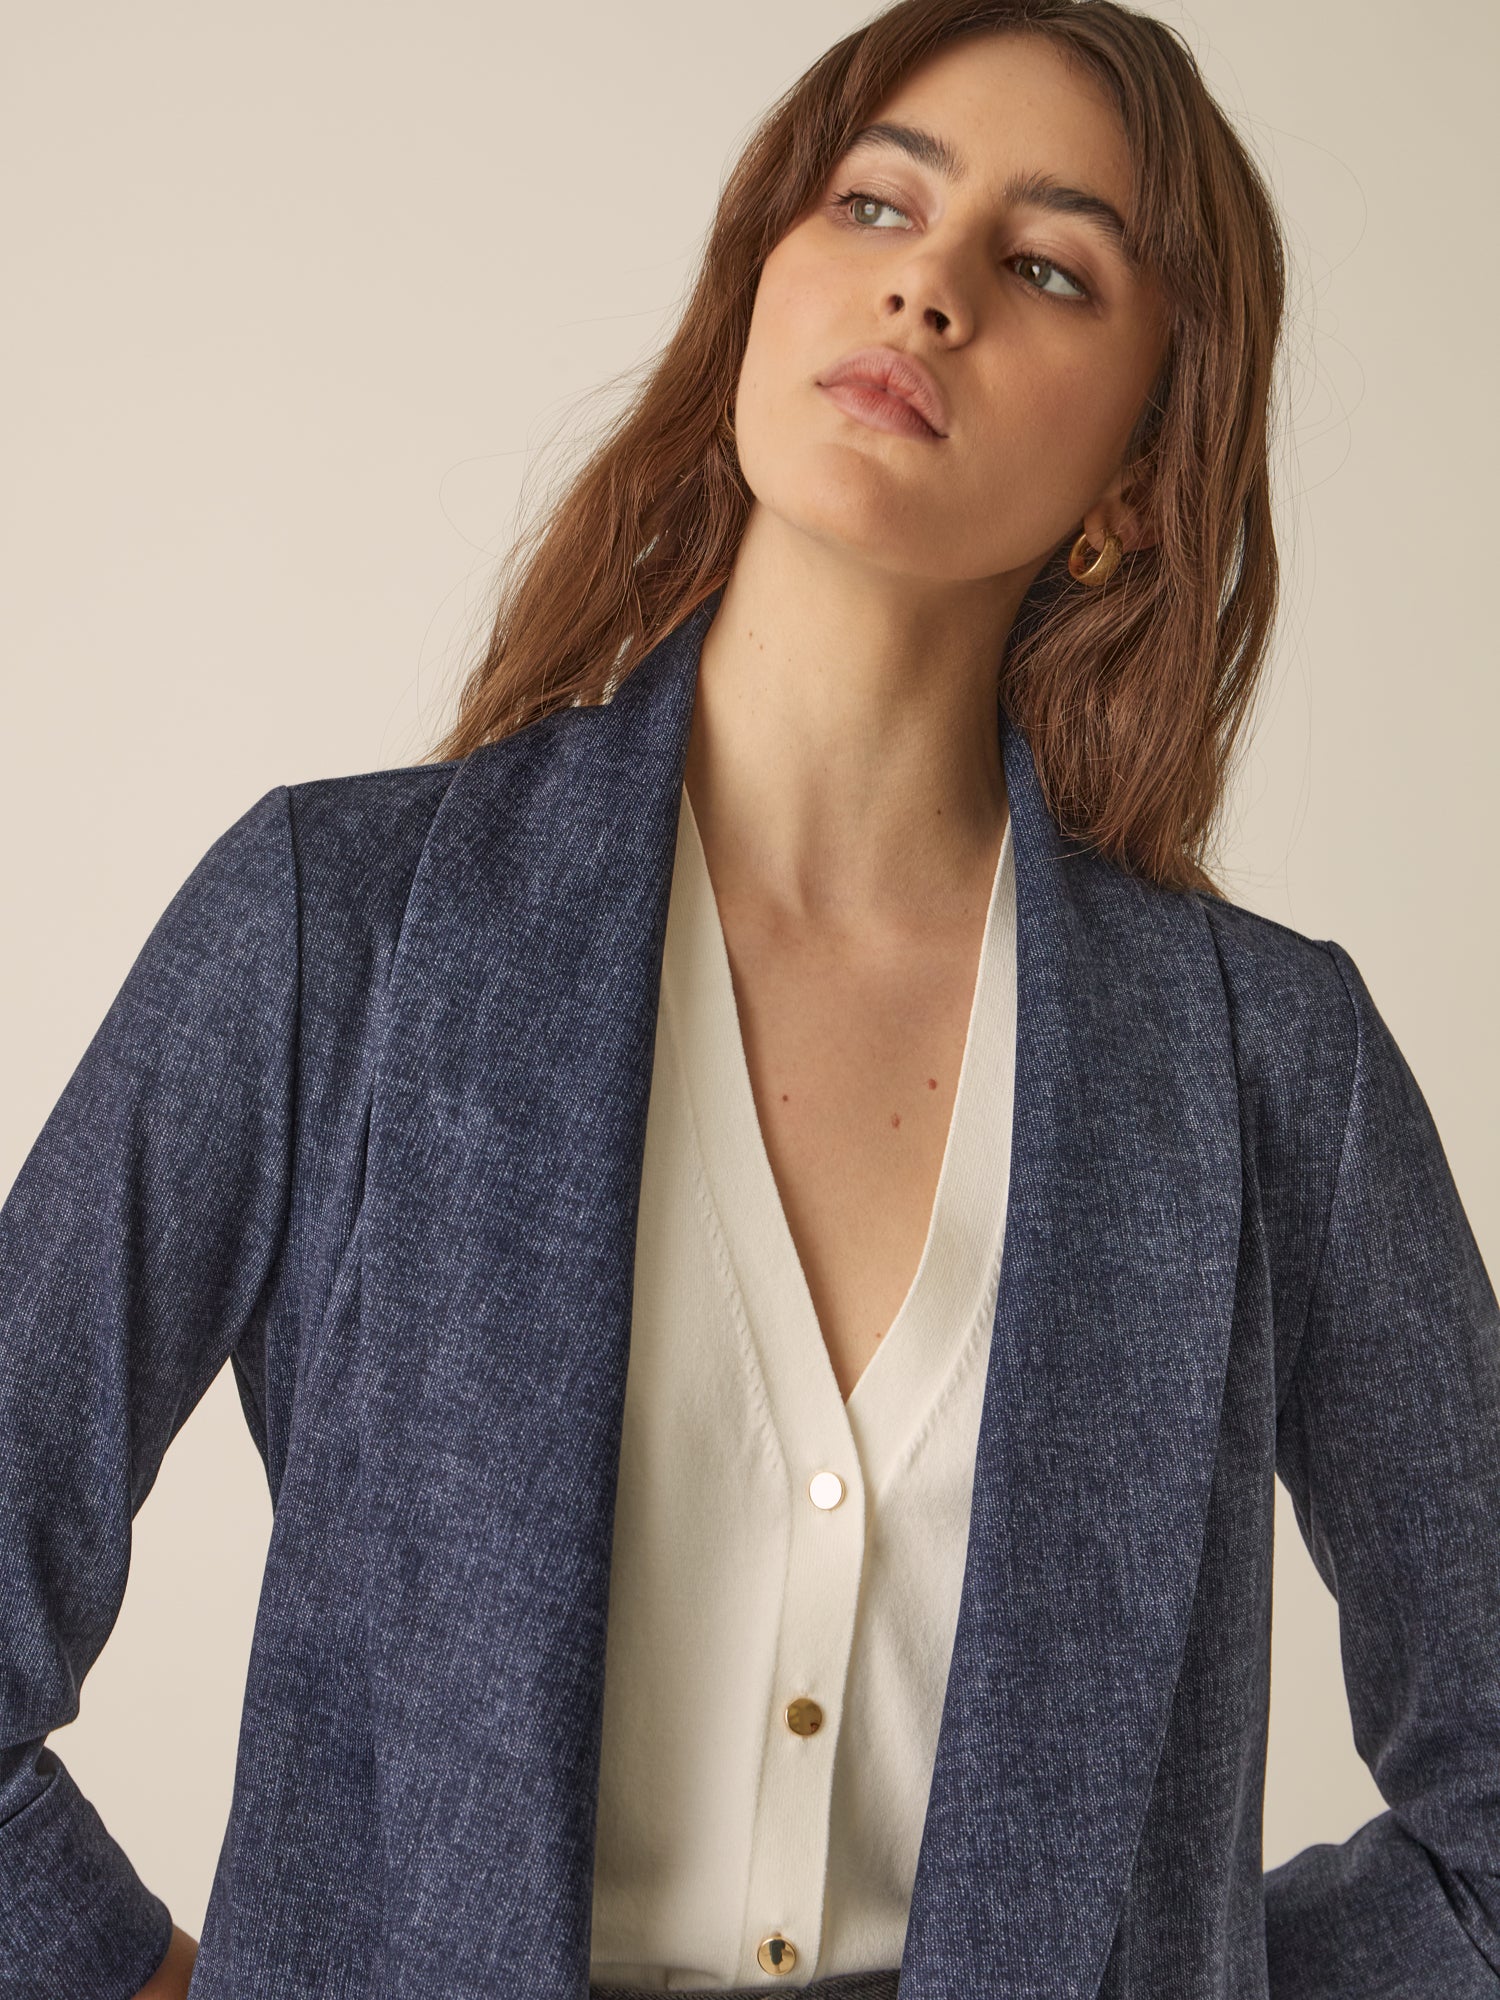 Classic Melanie Shawl Simple Staple Taupe Neutral Color Workwear Office Wear Women’s Outerwear Blazer Jacket Everyday Shawl Front Pockets Best Seller Customer Favorite Casual Style Everyday Jacket Indigo Denim Fabric Structured Material